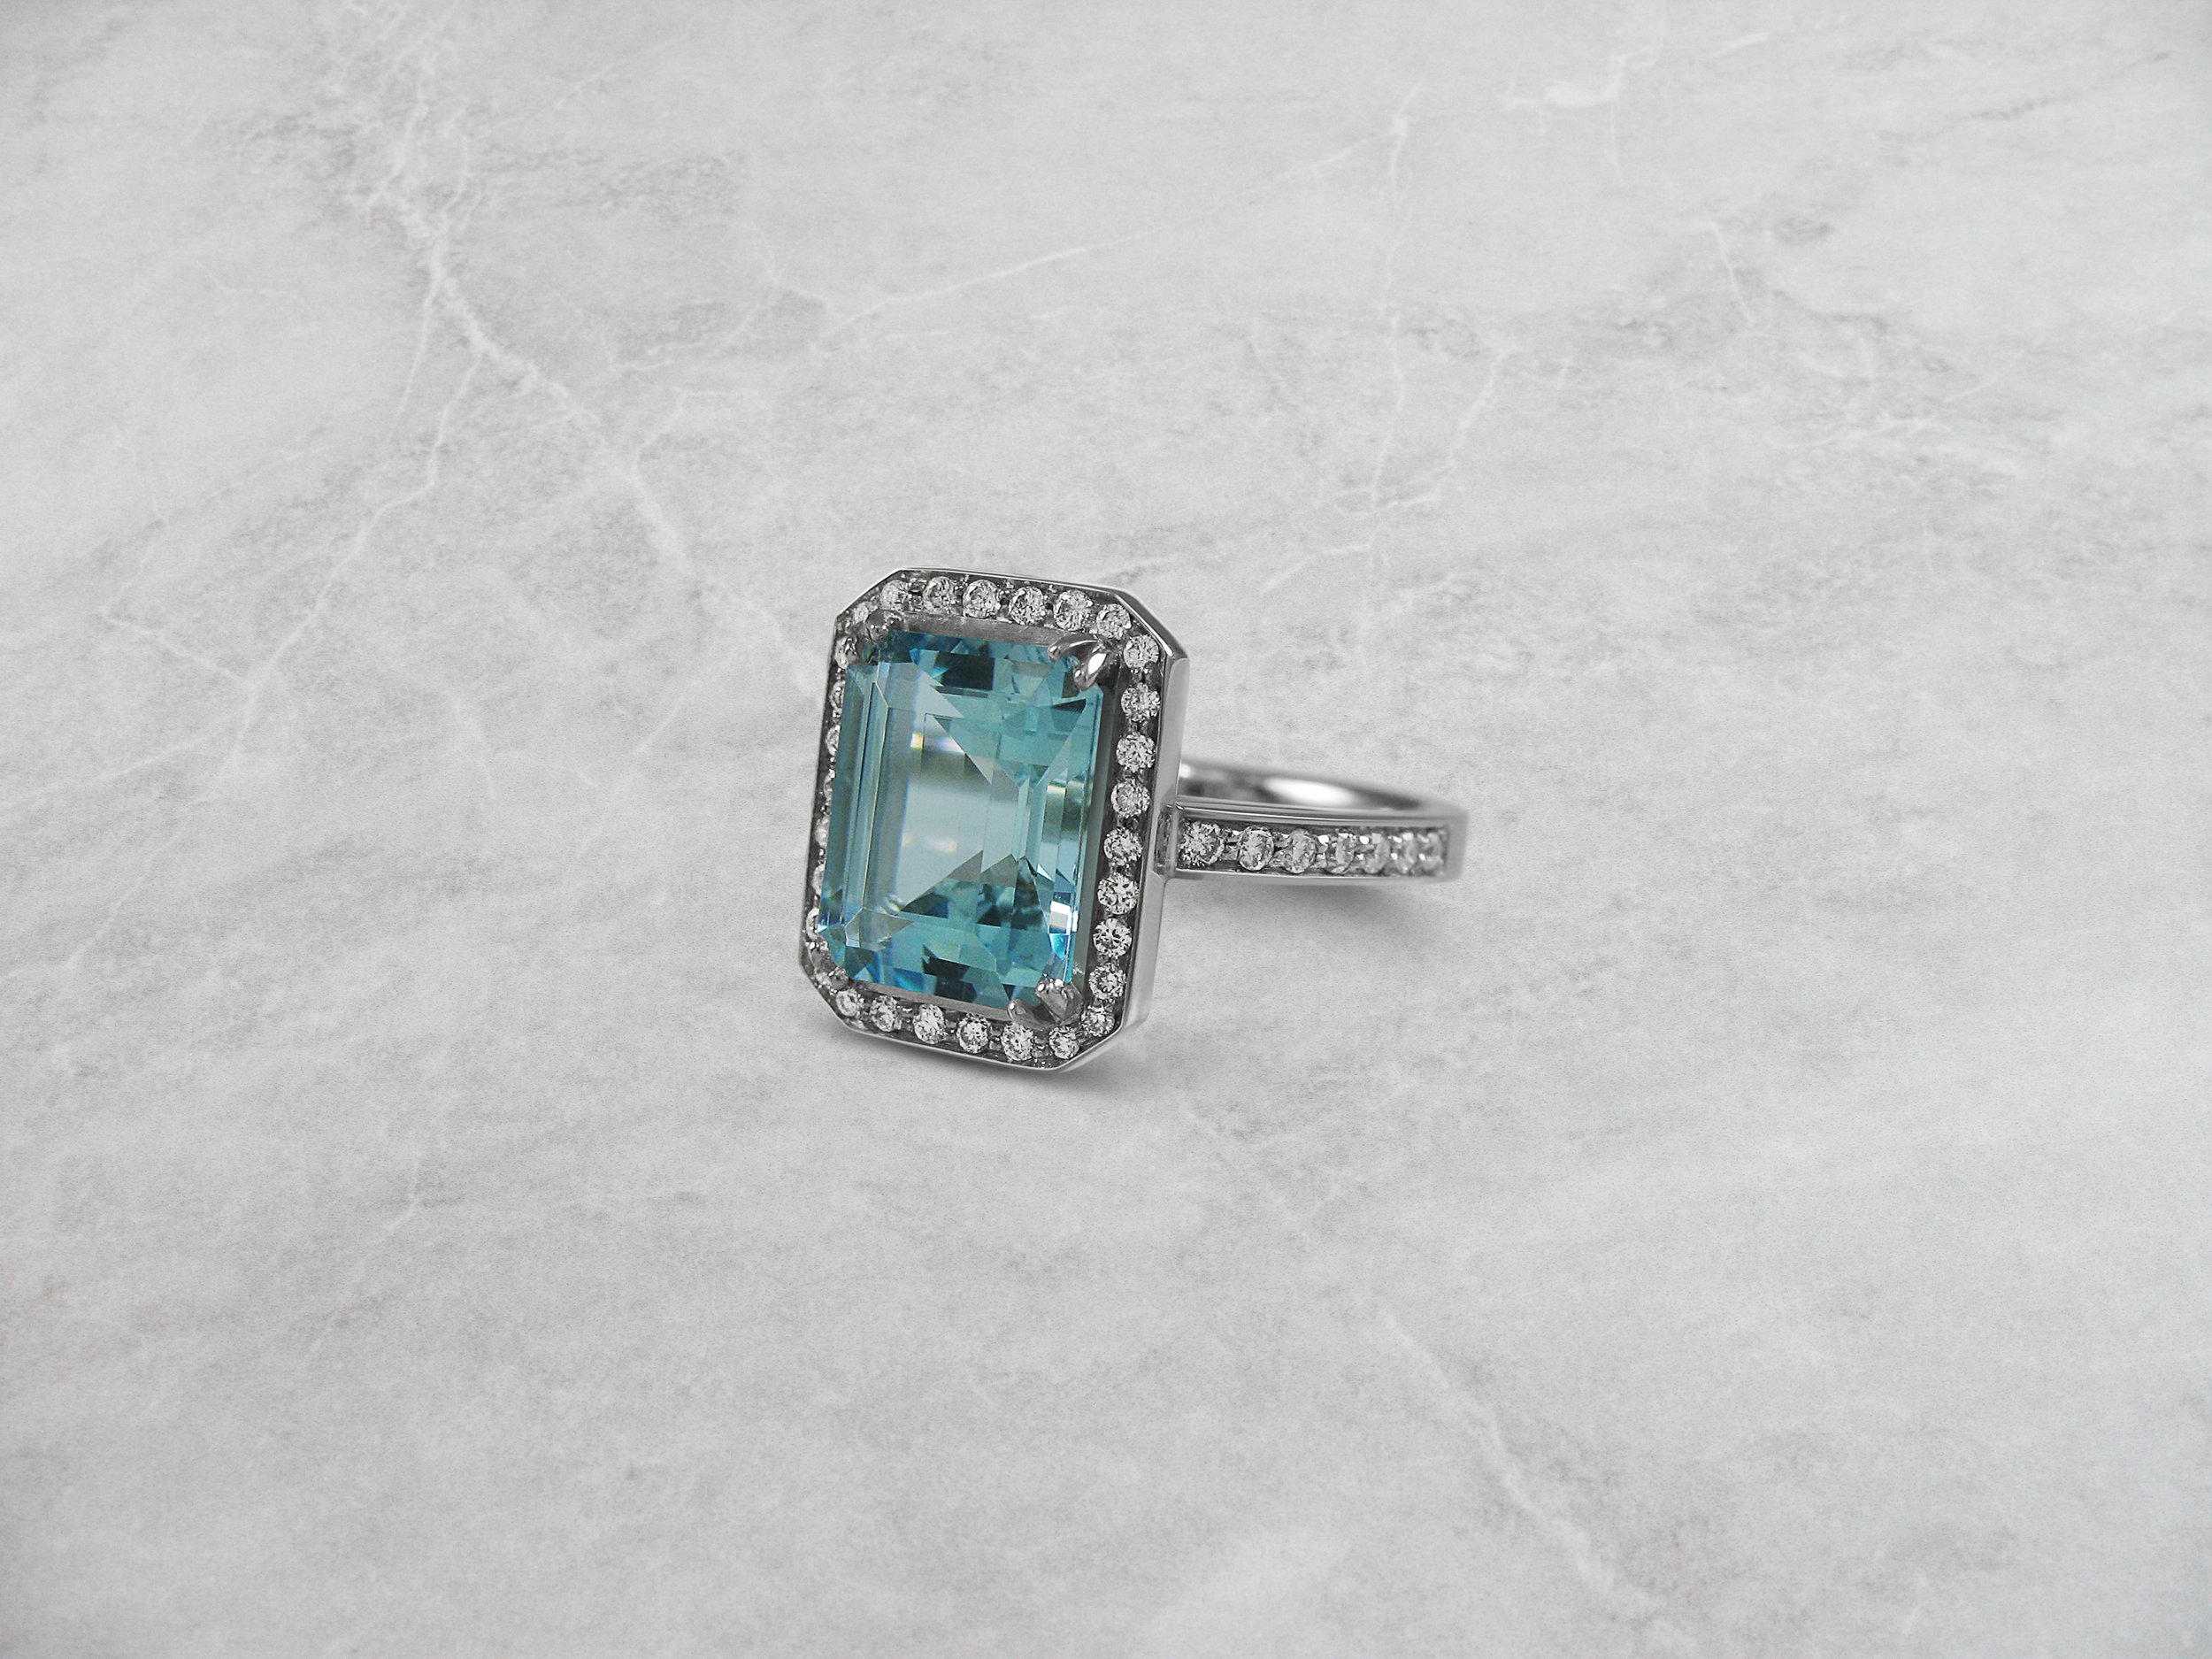 Aquamarine and diamond halo ring with double claws.jpg